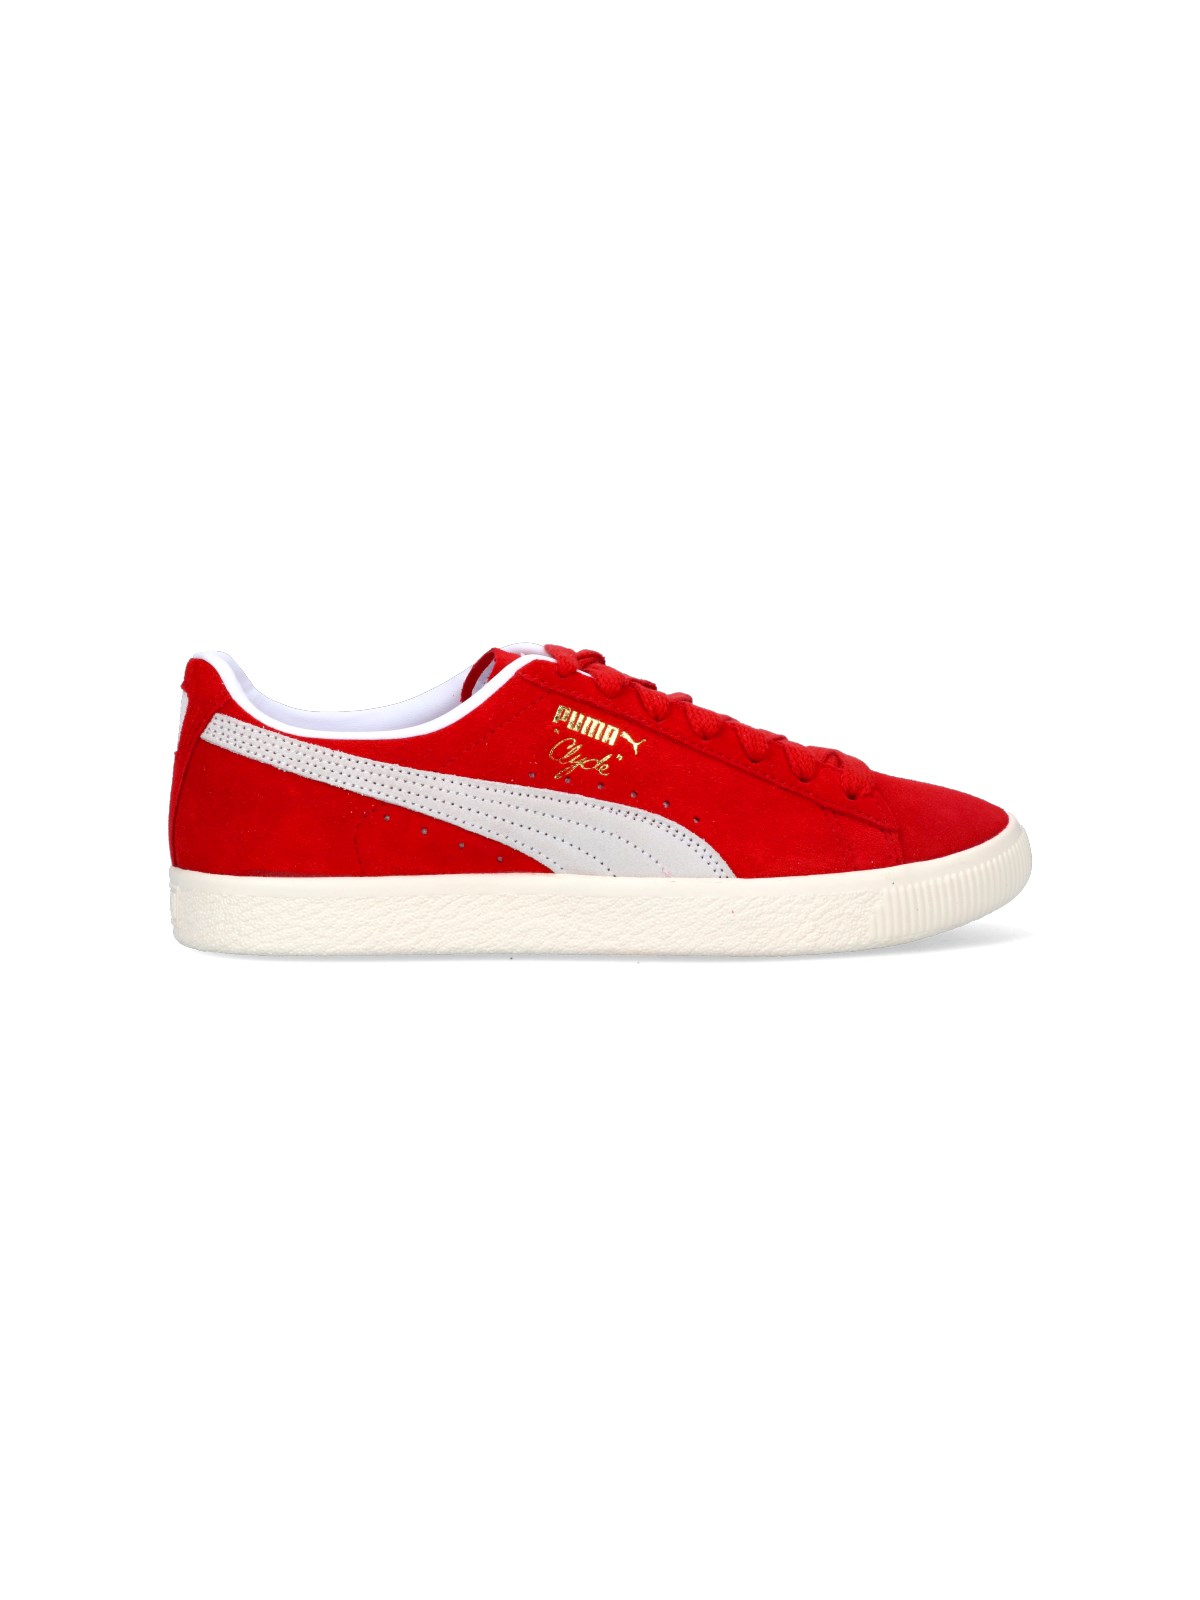 Puma 'clyde Og' Sneakers In For All Time Red- White-pristine